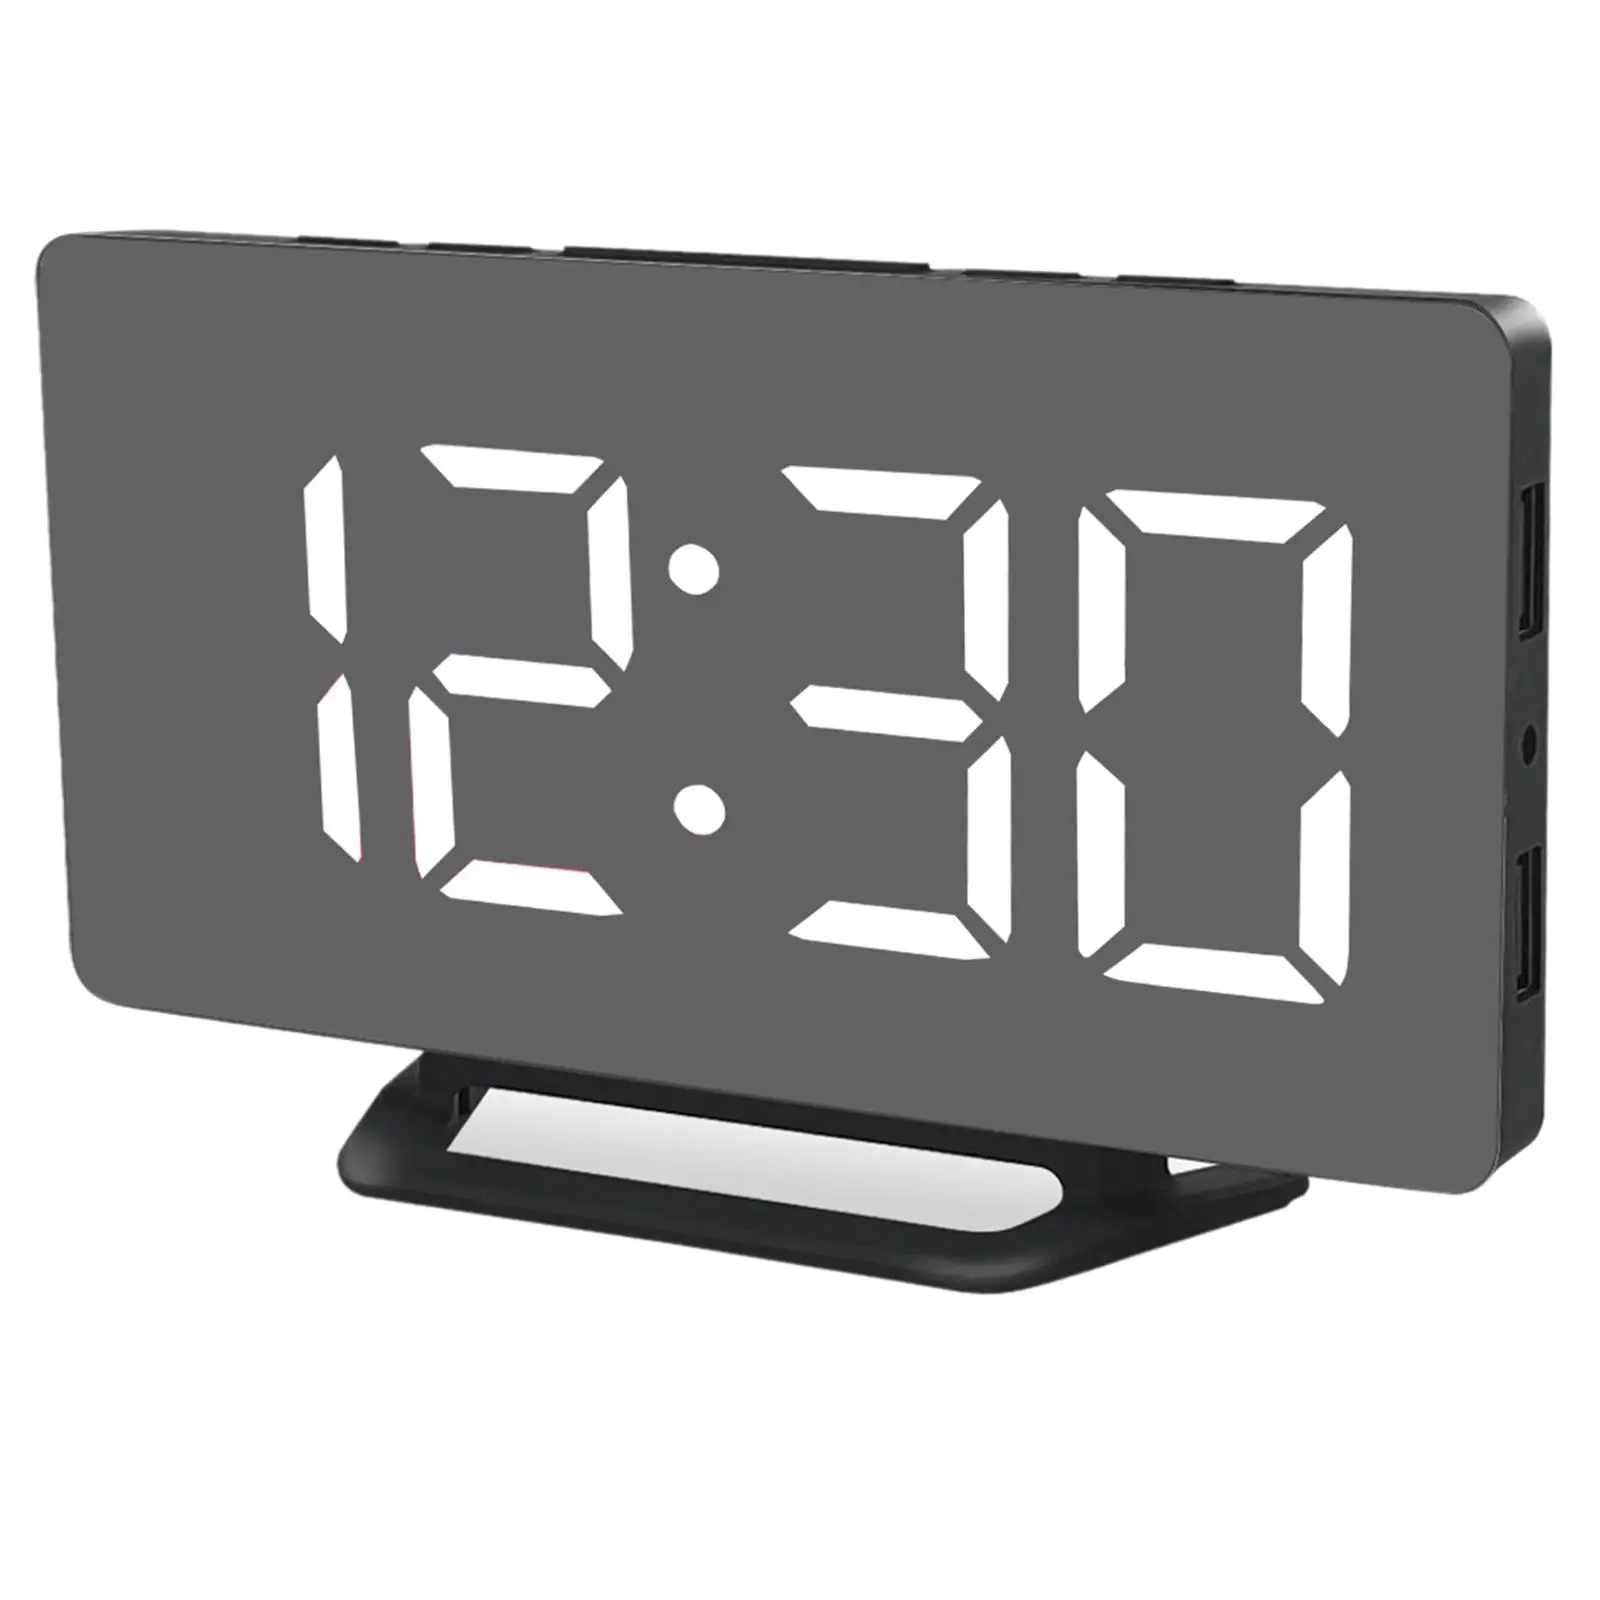 Digital Easy Snooze Function 3 Levels Brightness for office and home